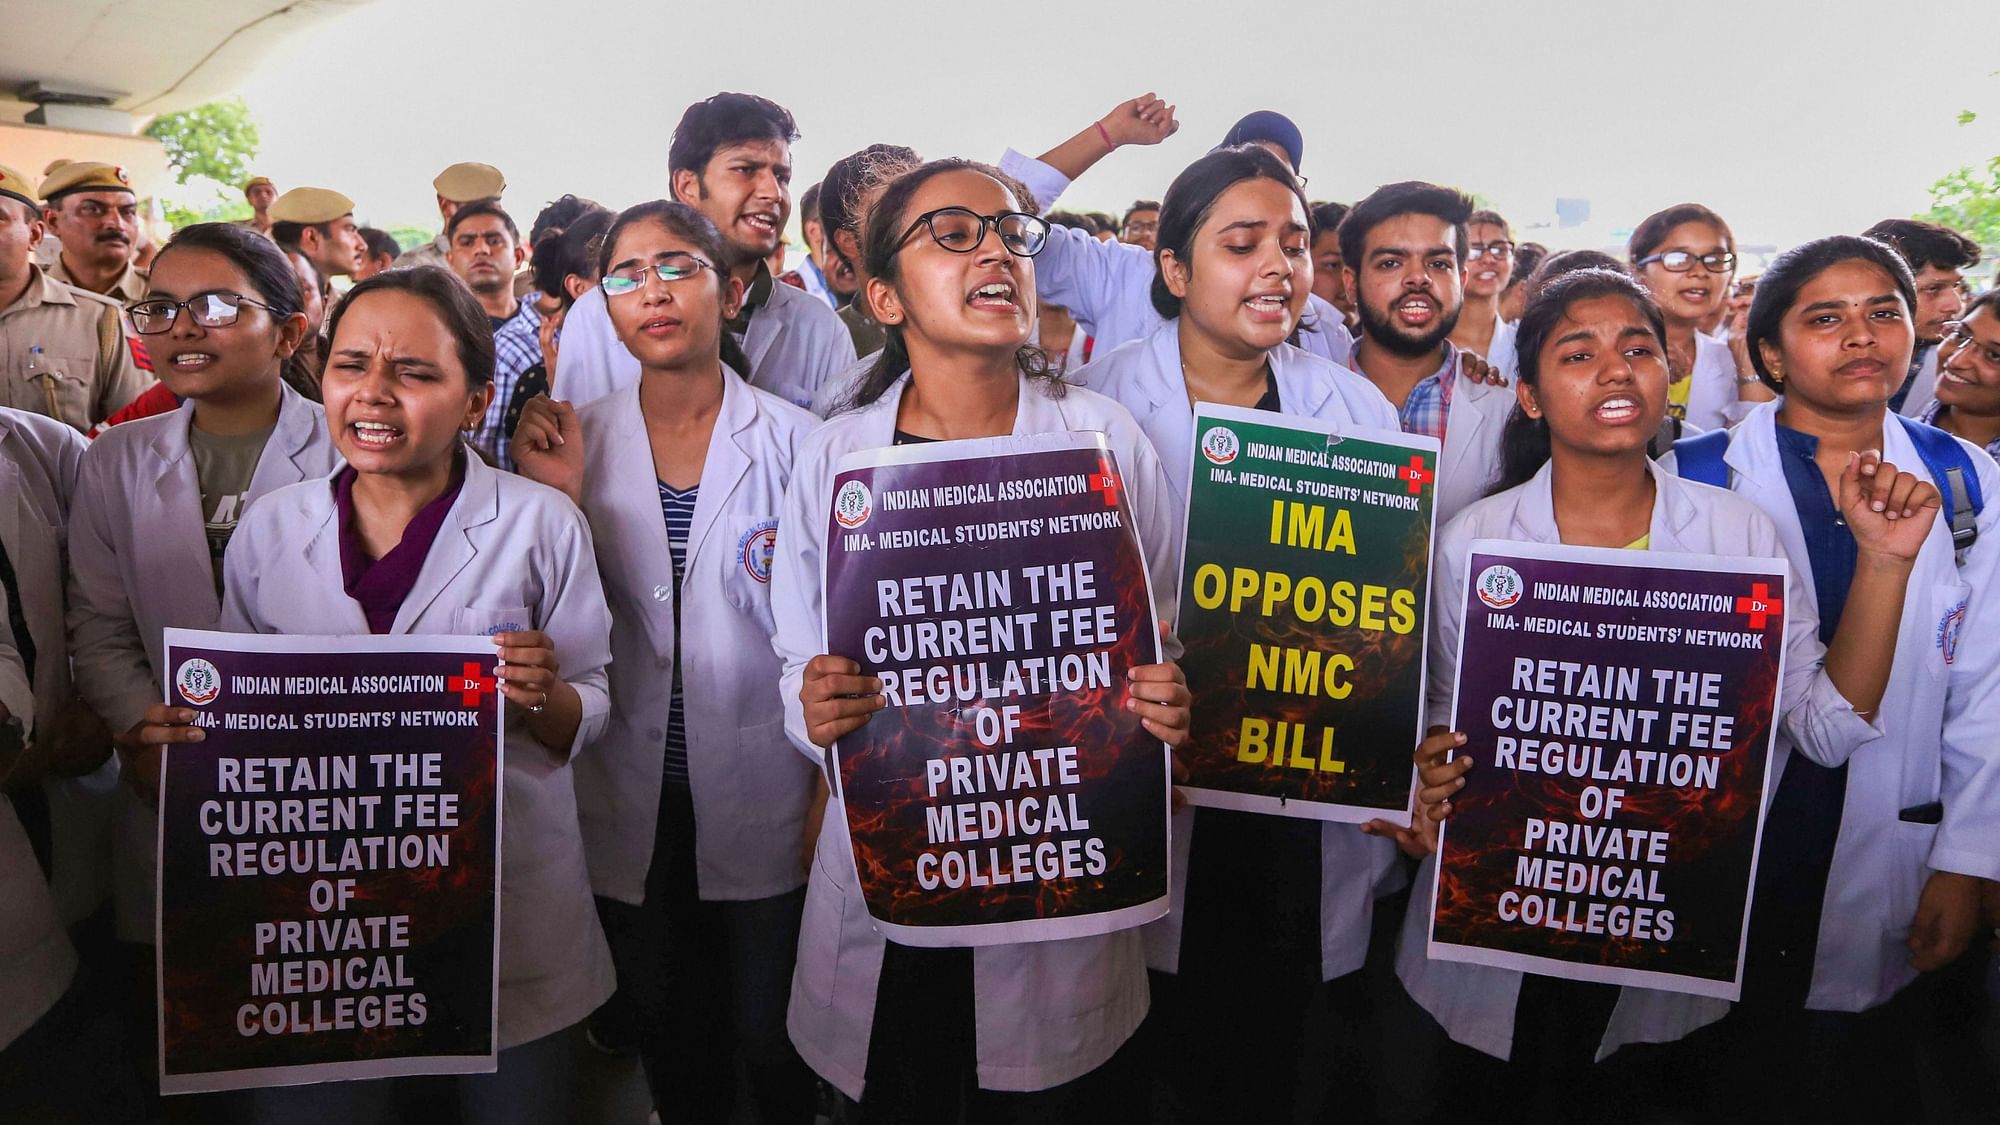 Doctors and medical students of AIIMS display placards during a strike to protest the introduction of the National Medical Commission (NMC) Bill in the Rajya Sabha, in New Delhi.